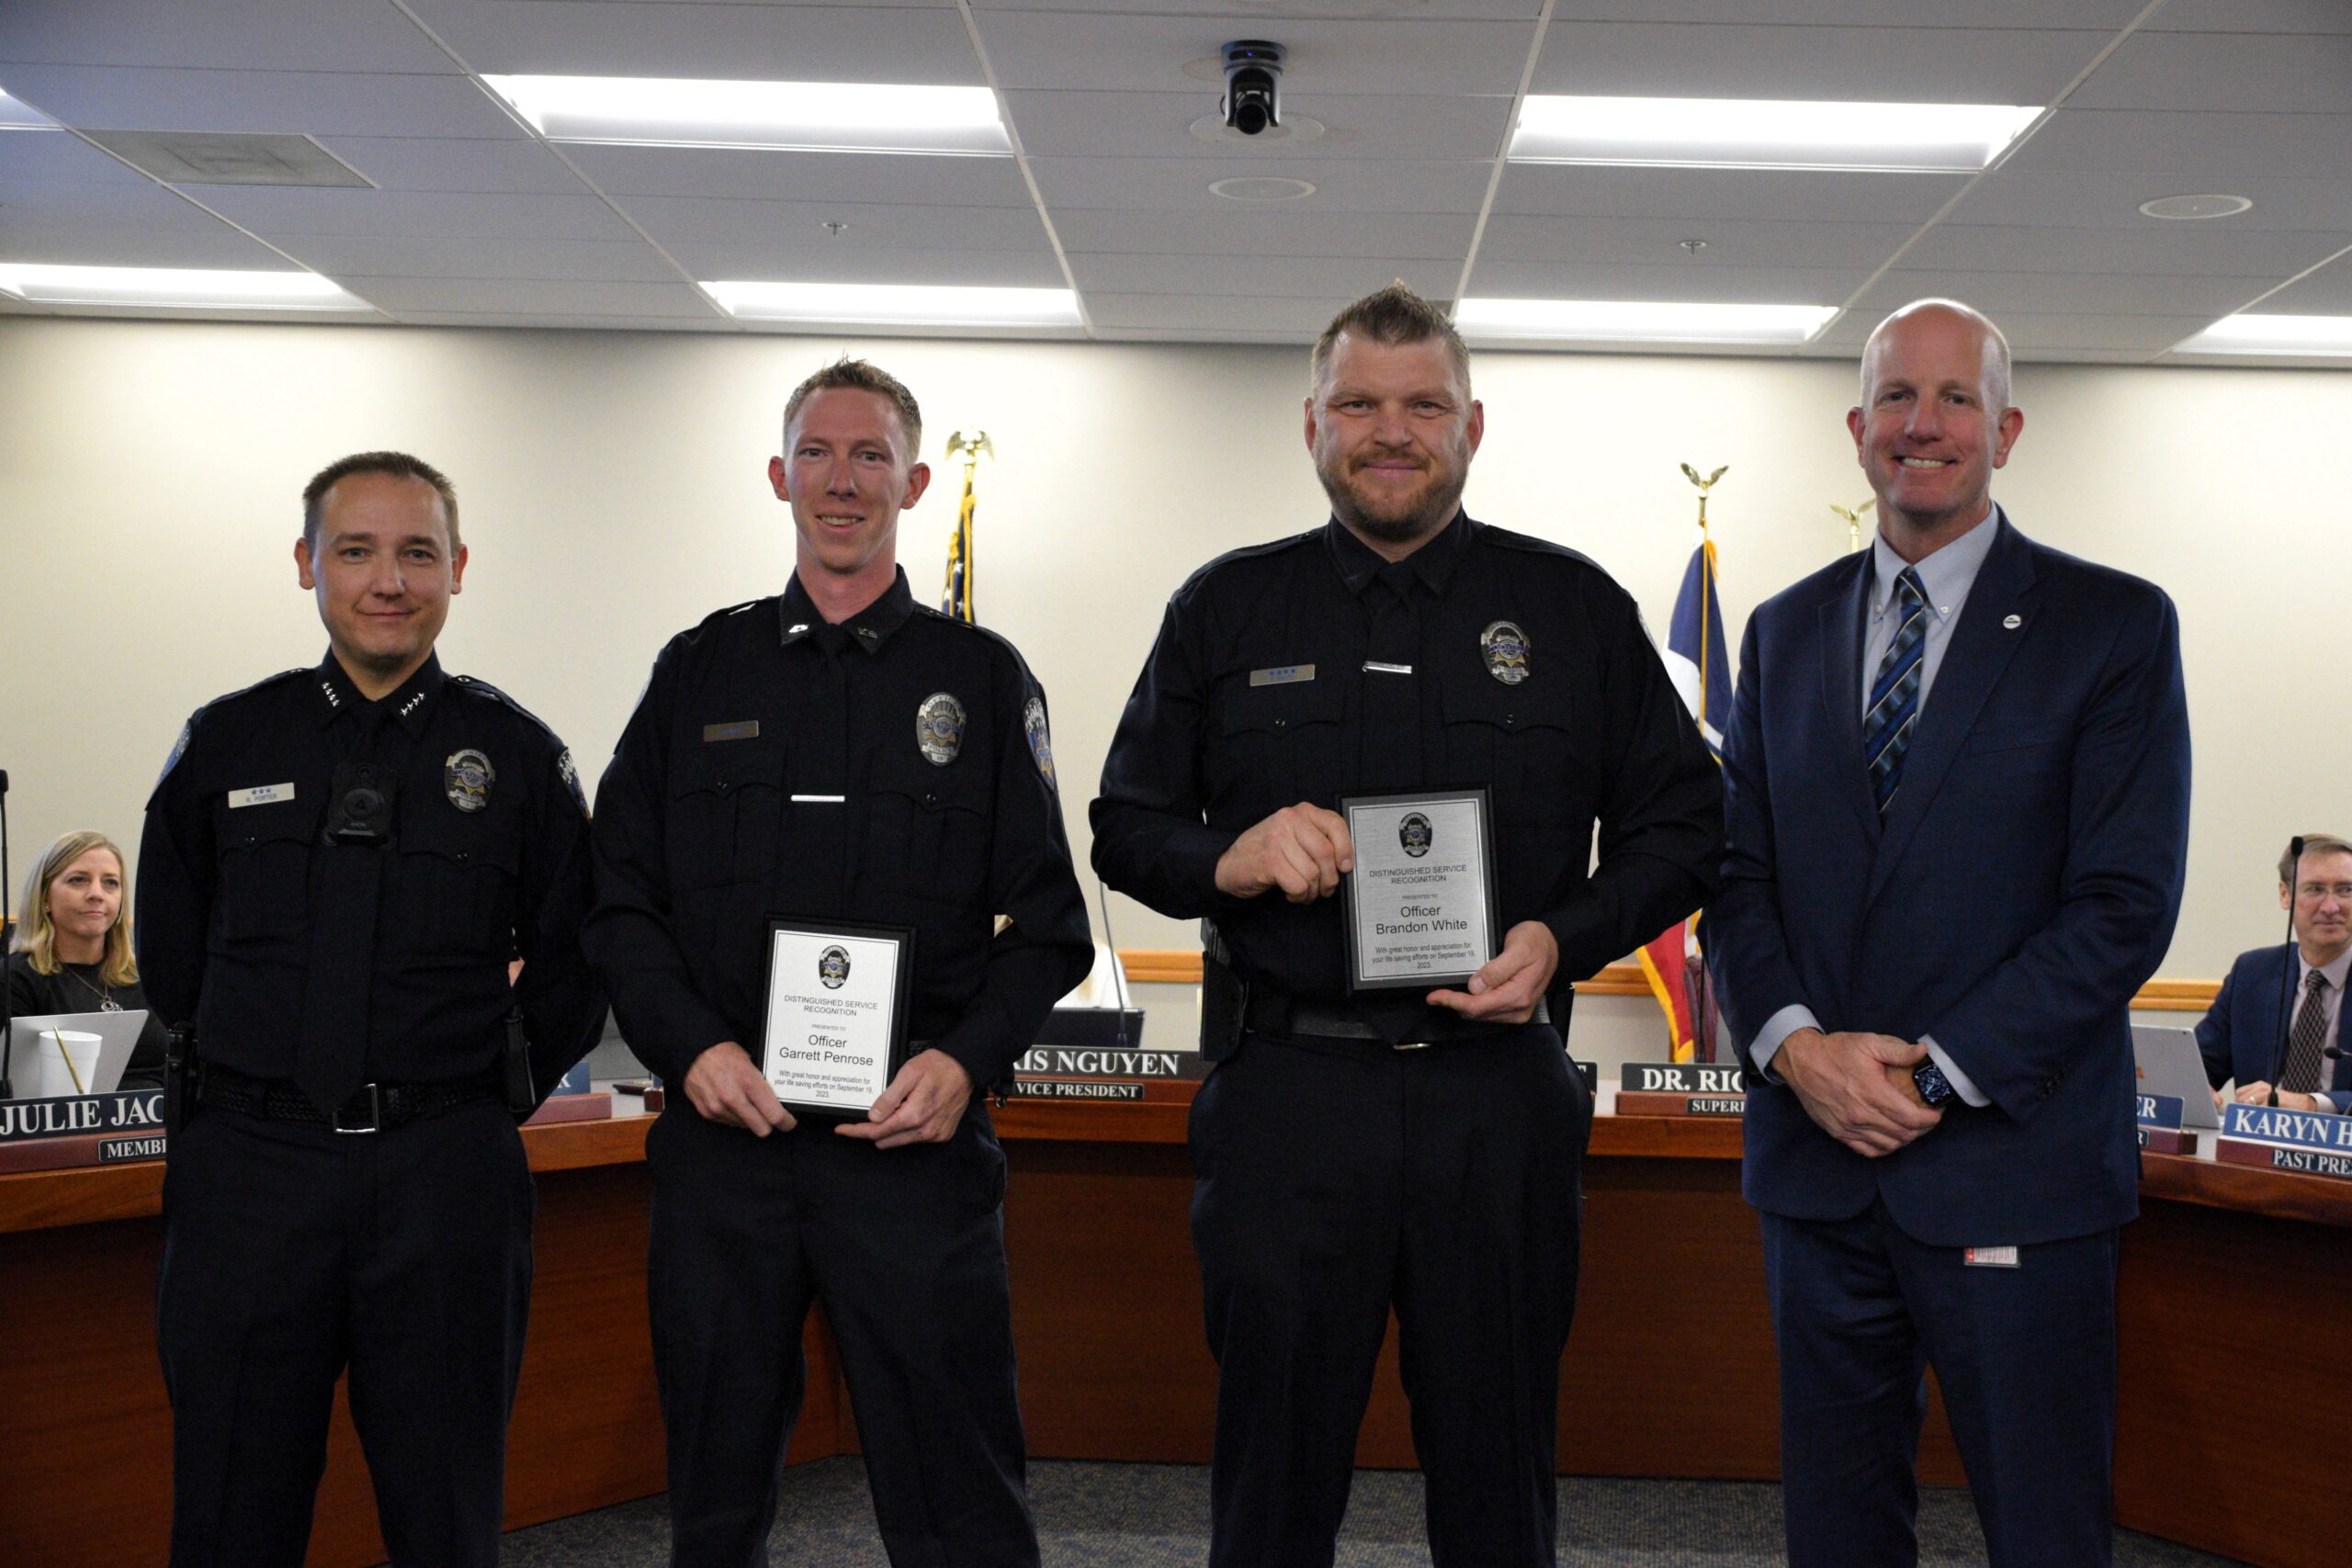 Granite Police Officers honored for Distinguished Service